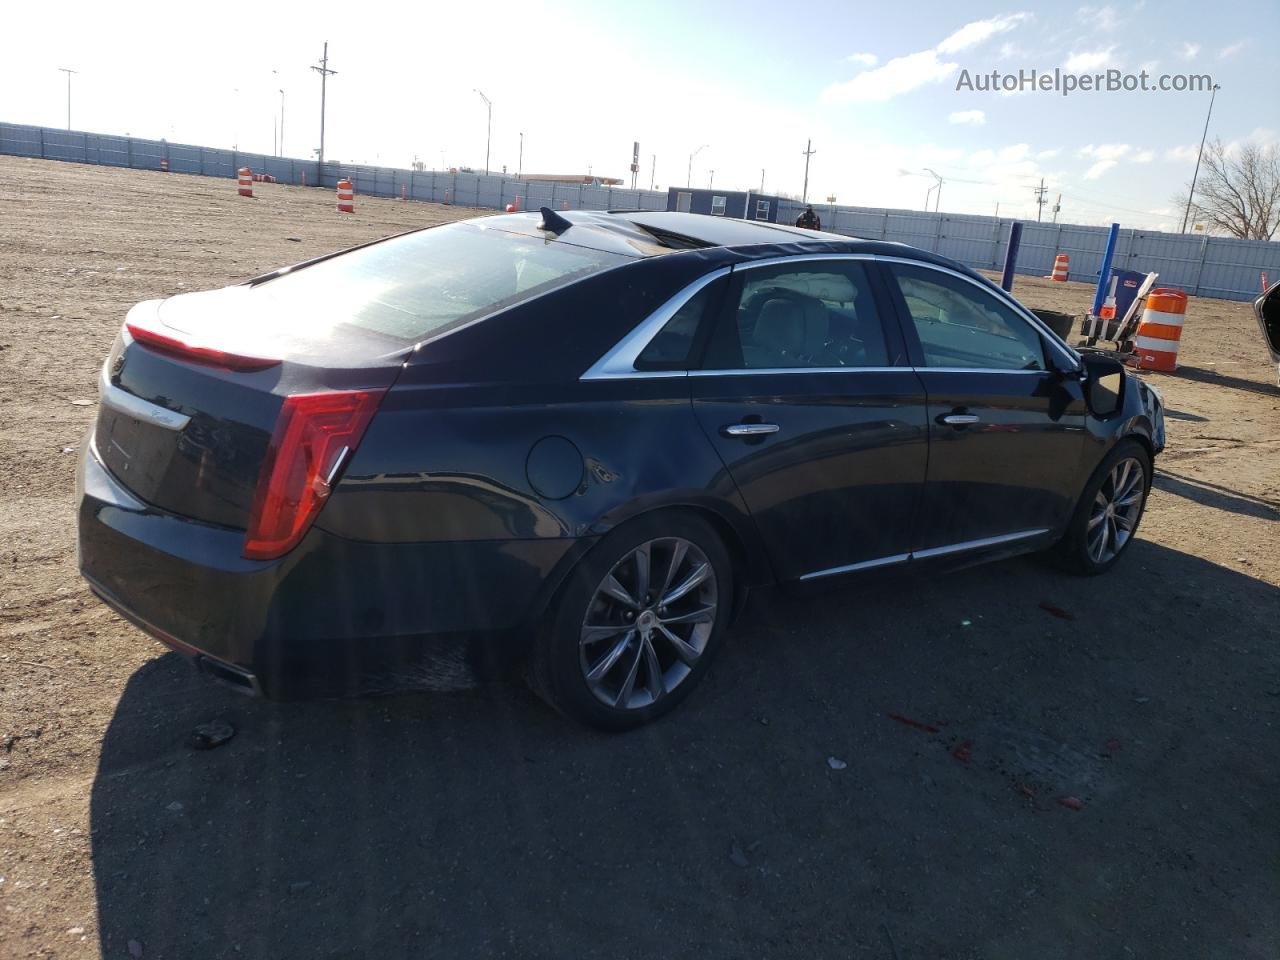 2013 Cadillac Xts Luxury Collection Blue vin: 2G61P5S3XD9206199